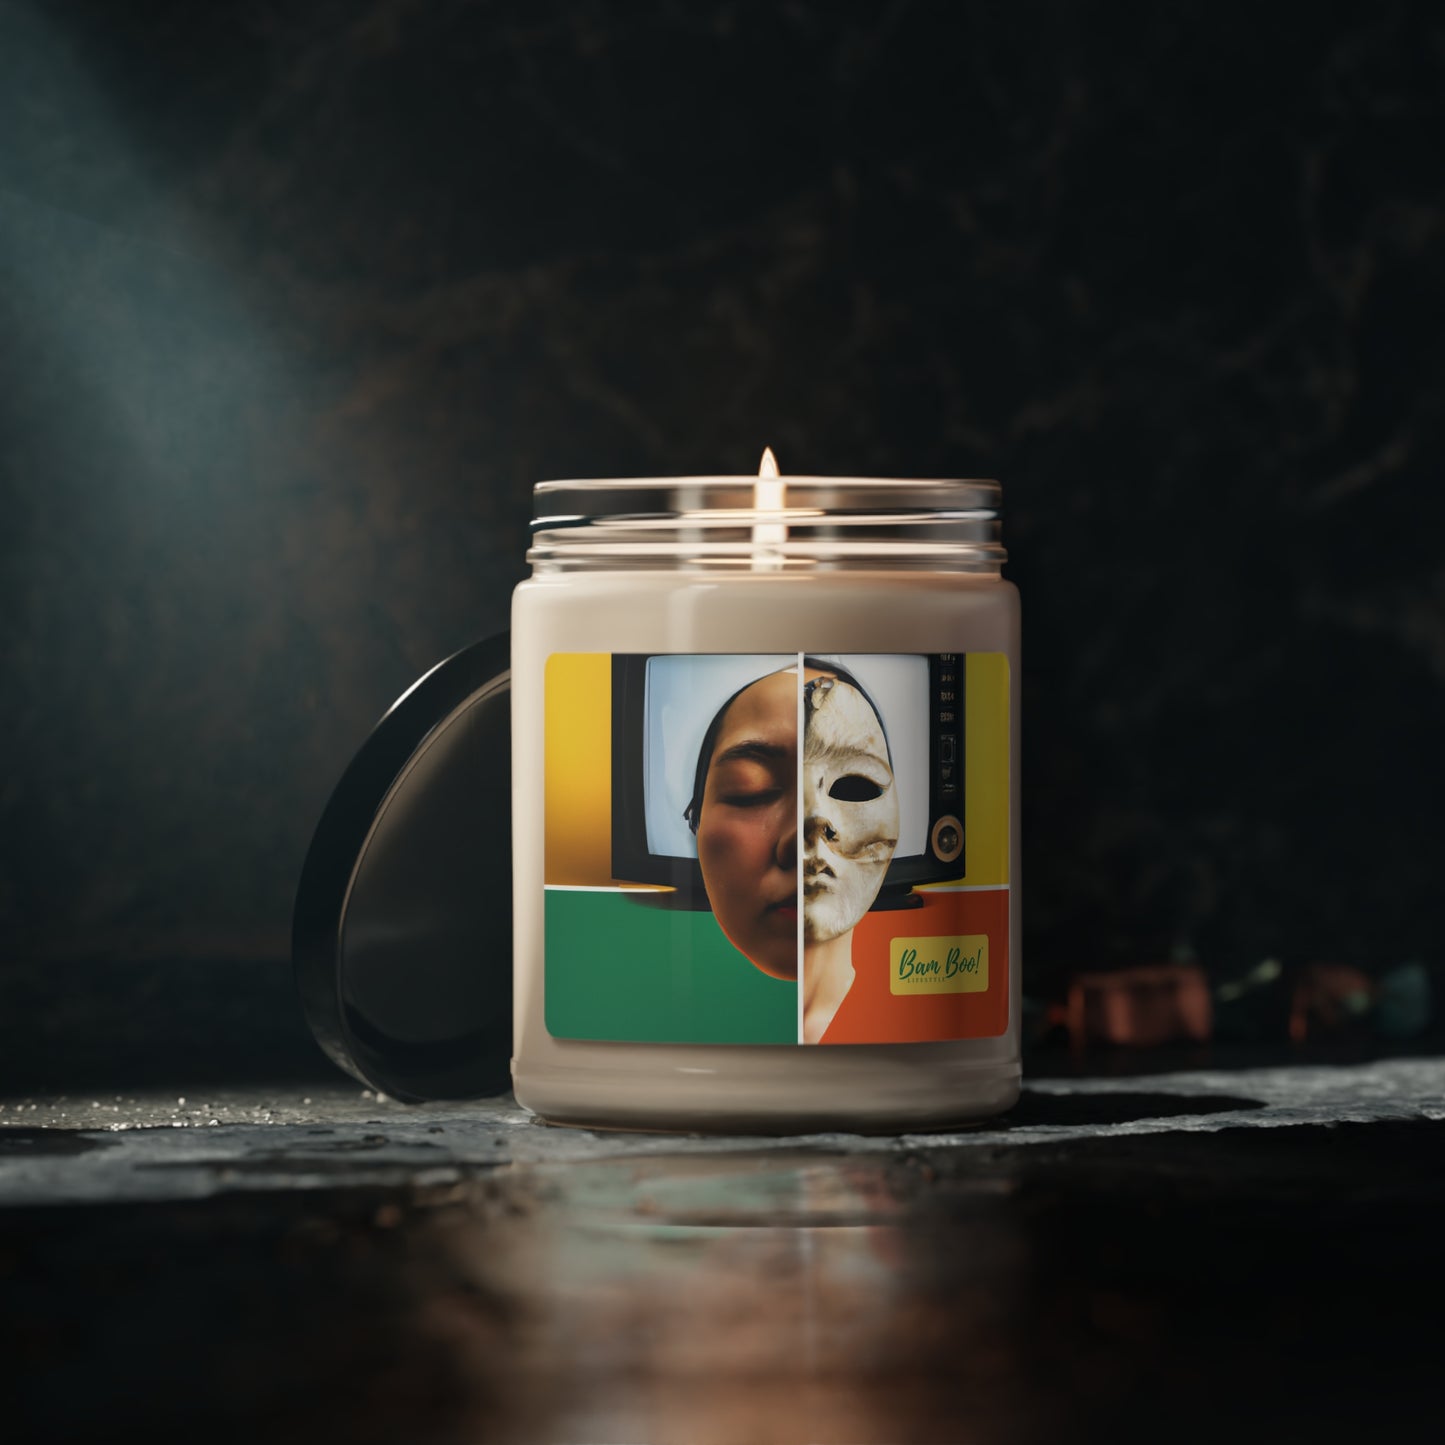 My Personal Vision Collage: A Creative Self-Portrait. - Bam Boo! Lifestyle Eco-friendly Soy Candle